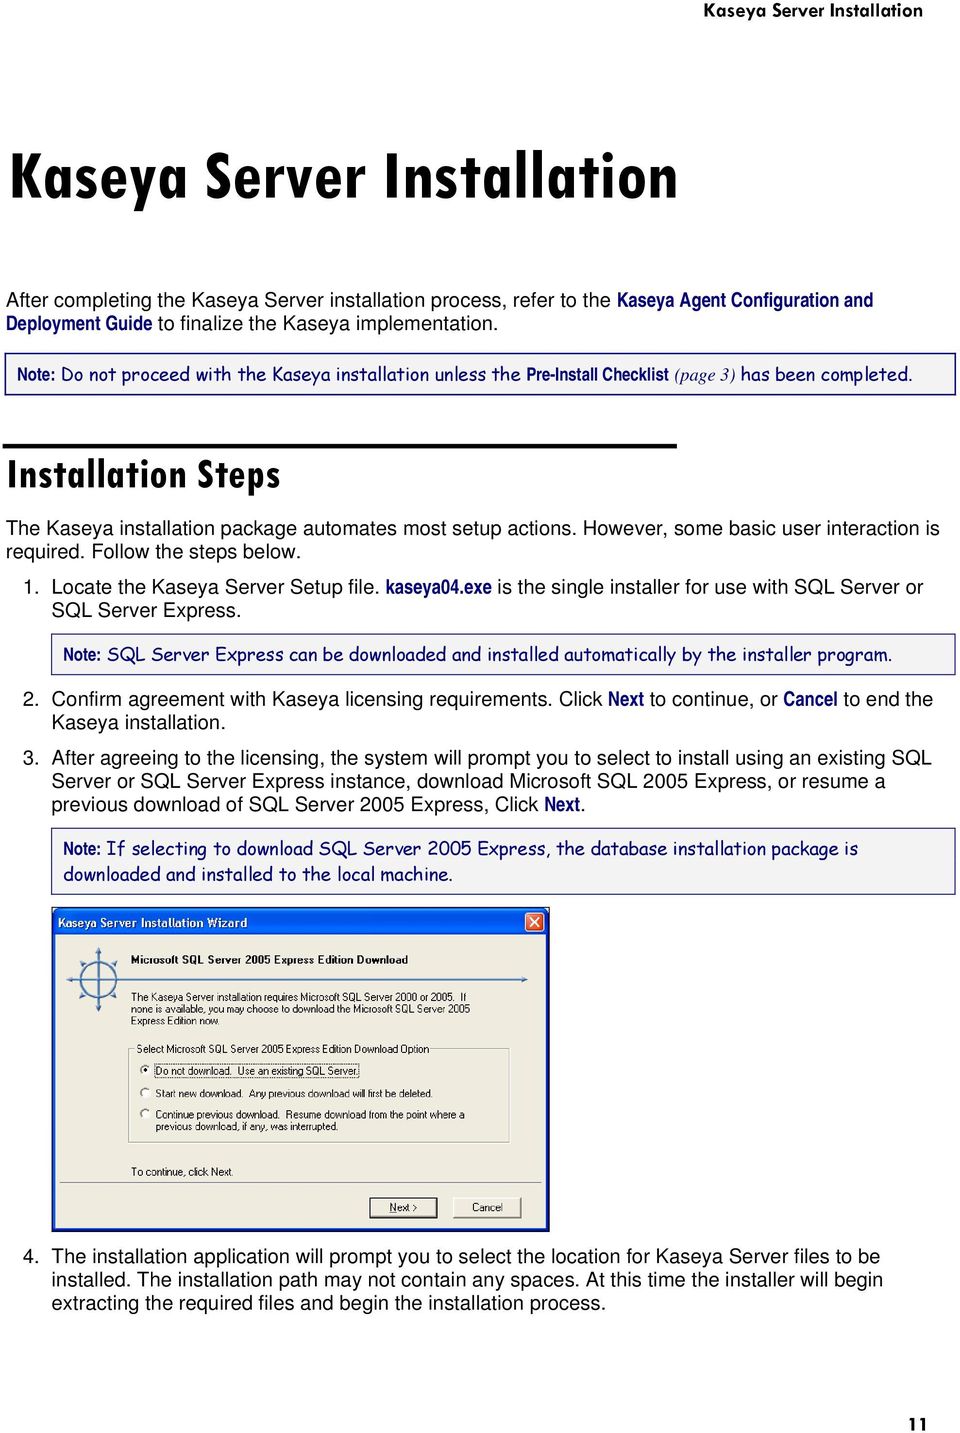 Installation Steps The Kaseya installation package automates most setup actions. However, some basic user interaction is required. Follow the steps below. 1. Locate the Kaseya Server Setup file.